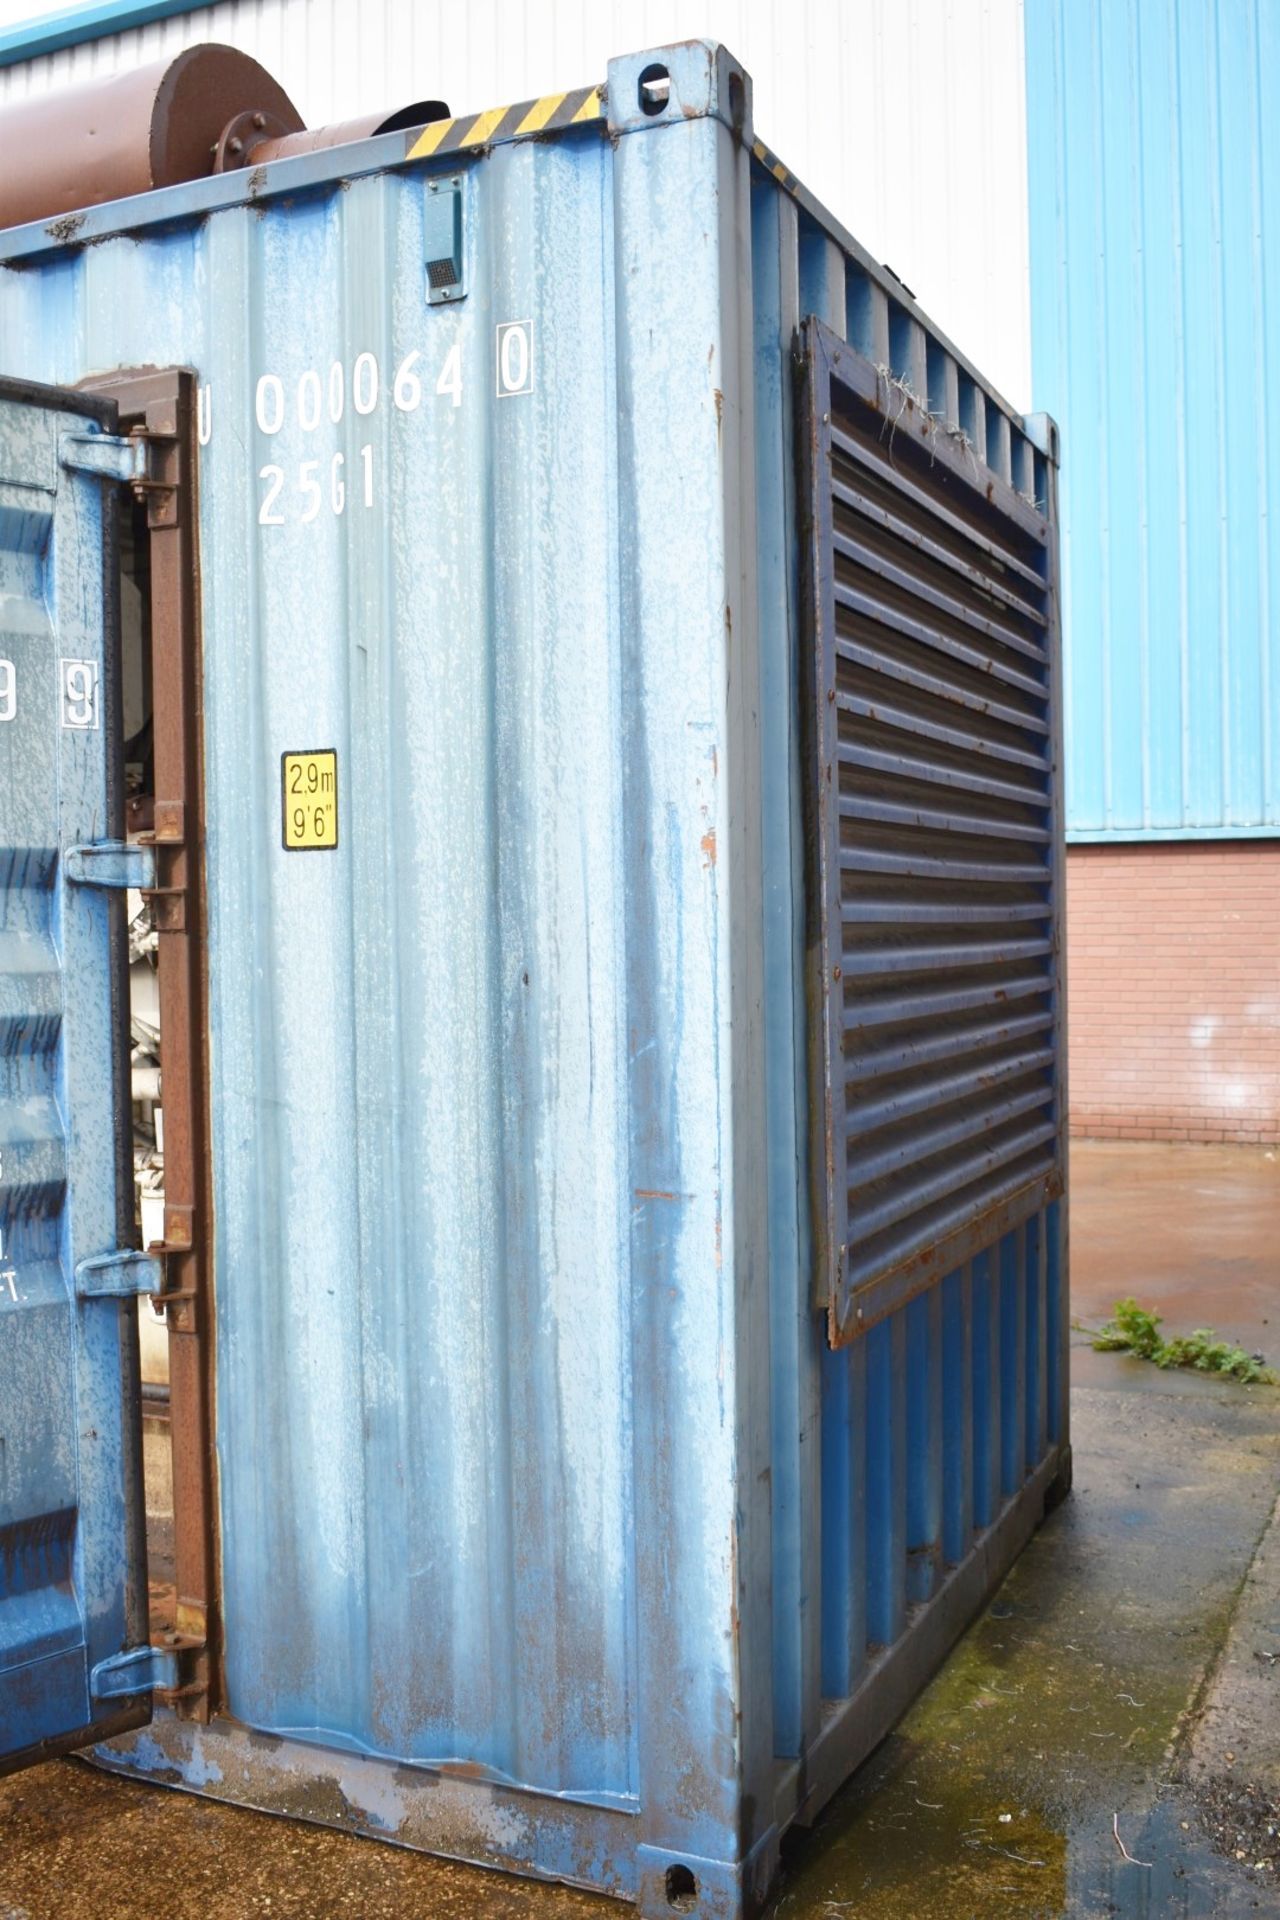 1 x Puma 1000kw Generator With Doorman Engine - Housed in 20ft Shipping Container - CL547 - No VAT - Image 3 of 28